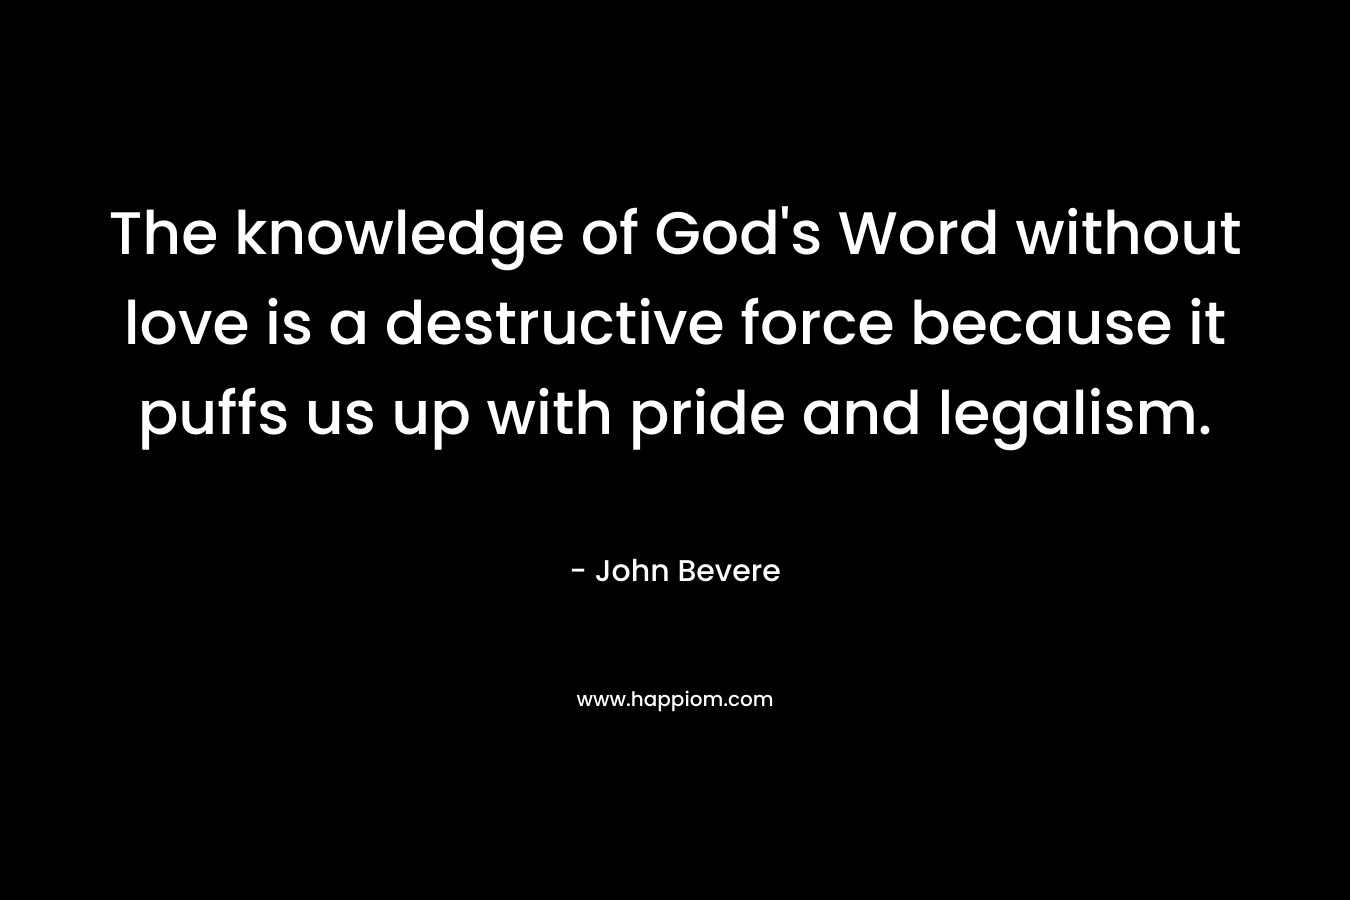 The knowledge of God's Word without love is a destructive force because it puffs us up with pride and legalism.